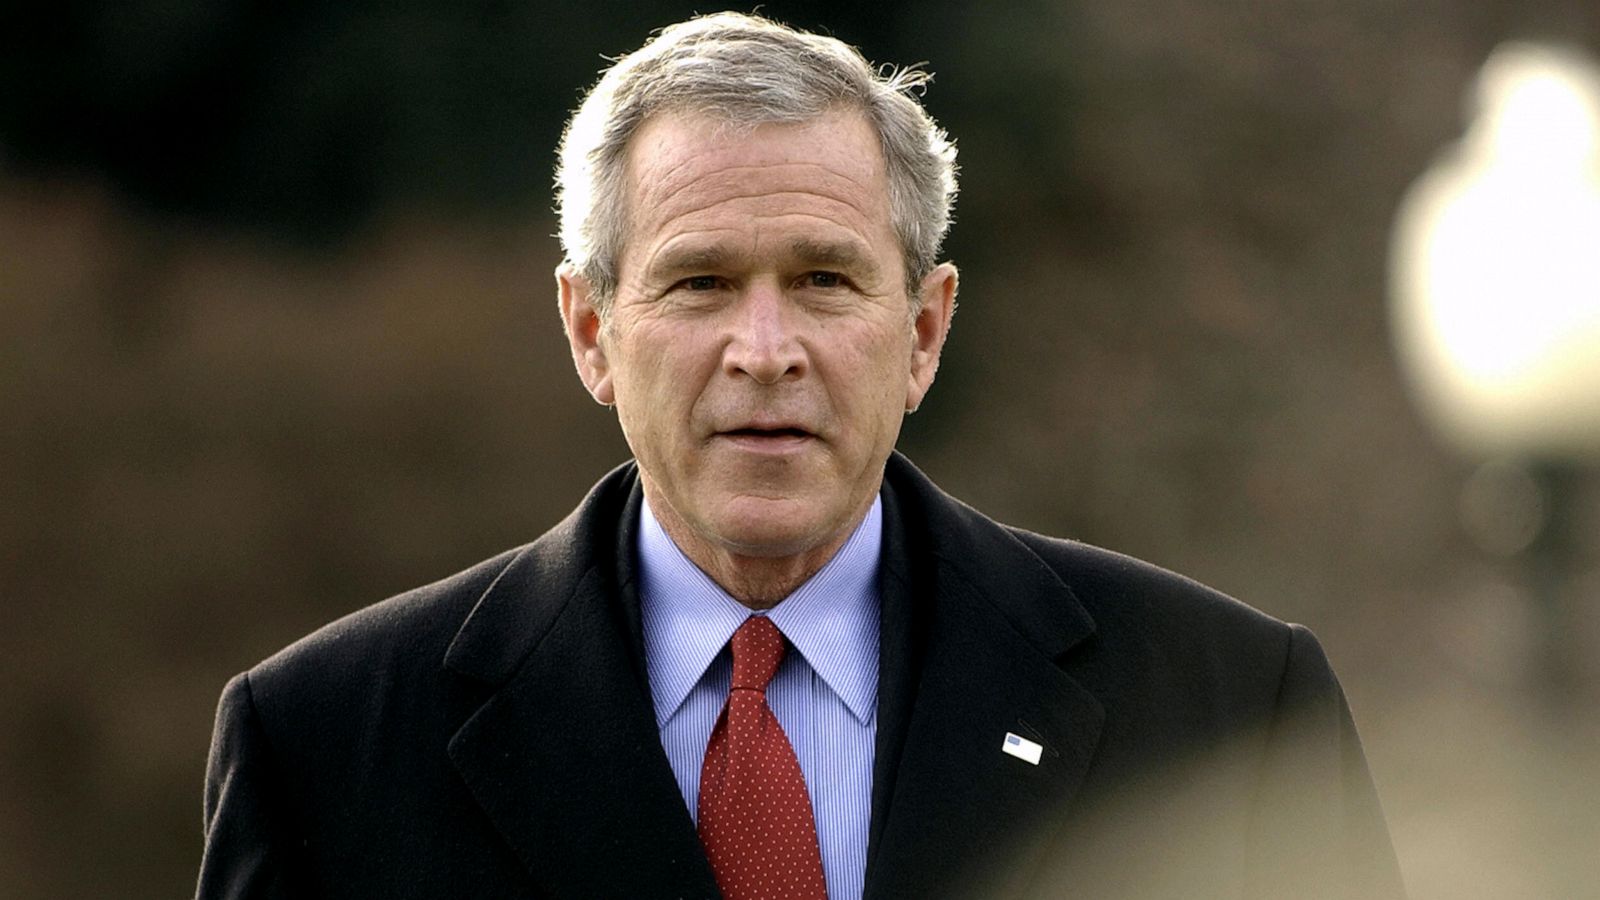 George W. Bush in 2005: 'If we wait for a pandemic to appear, it will be  too late to prepare' - ABC News